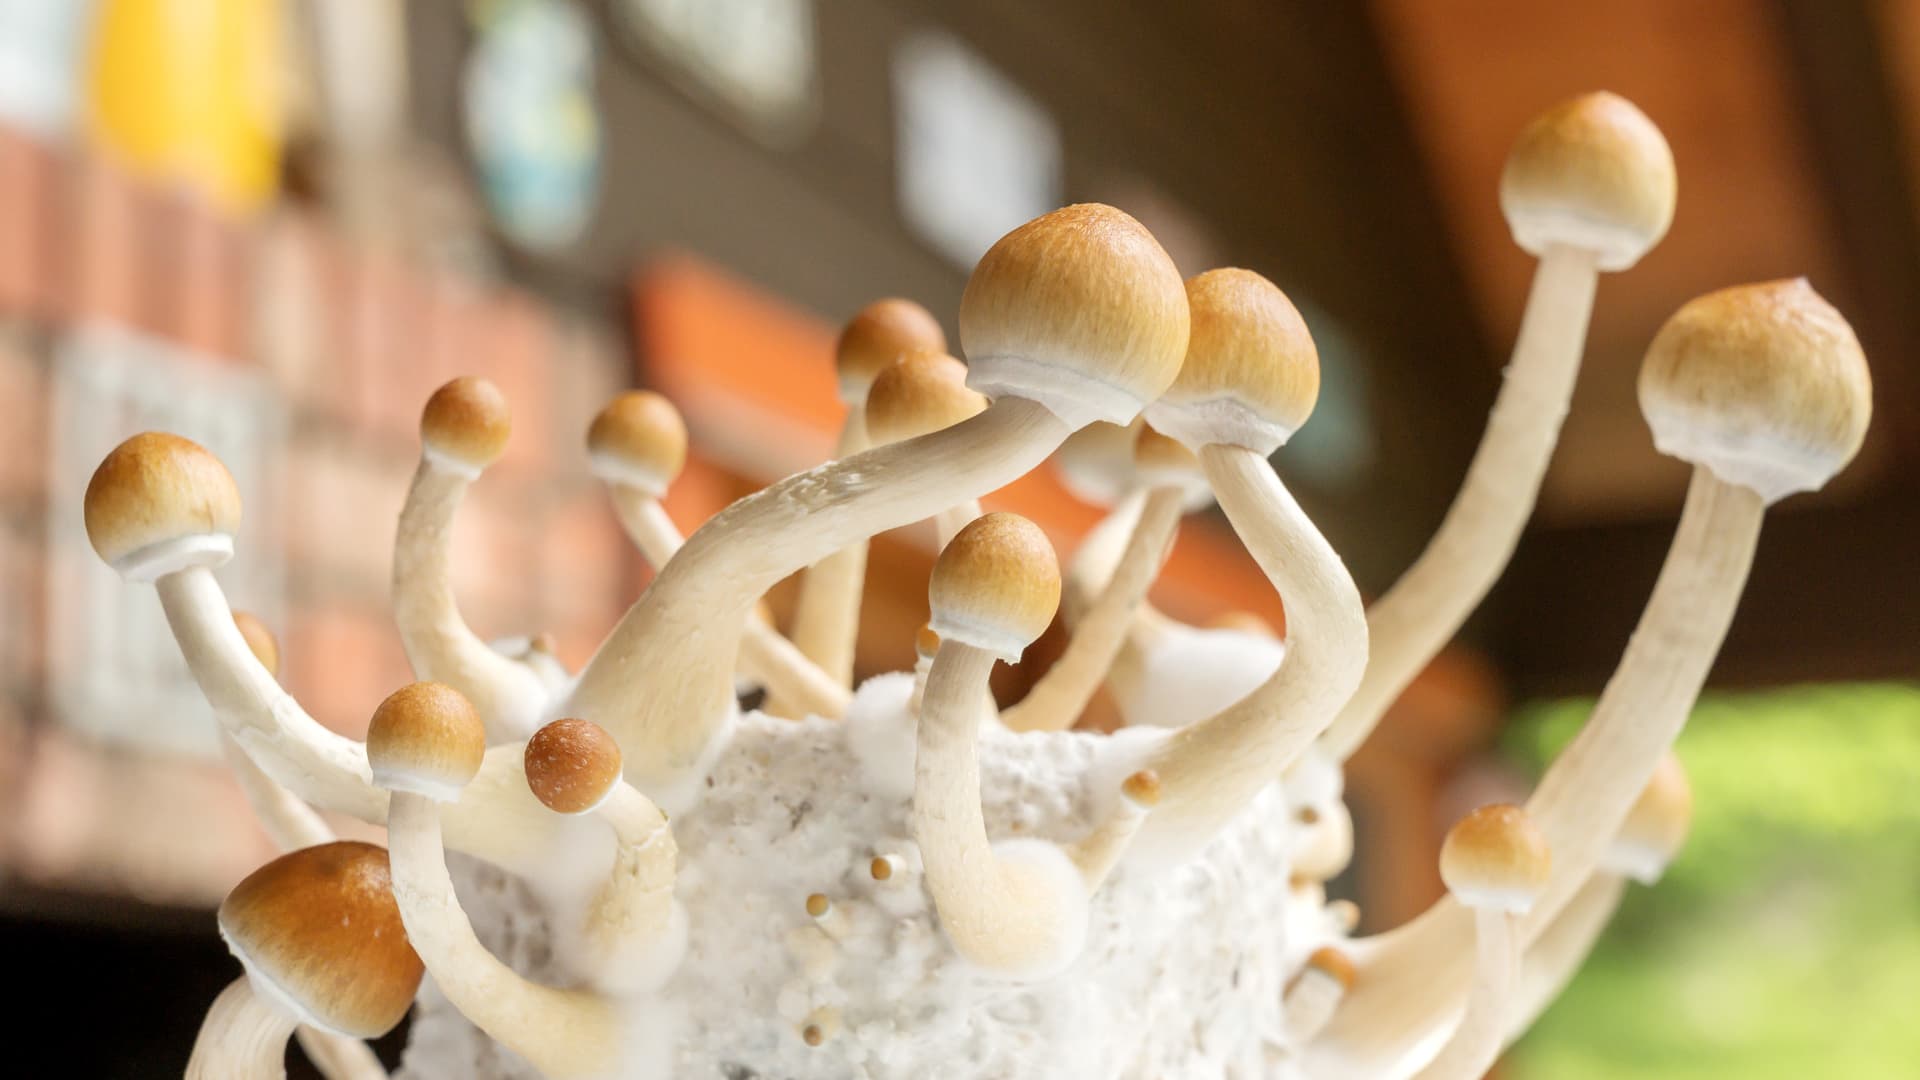 Magic mushroom compound psilocybin may also help deal with despair, research finds